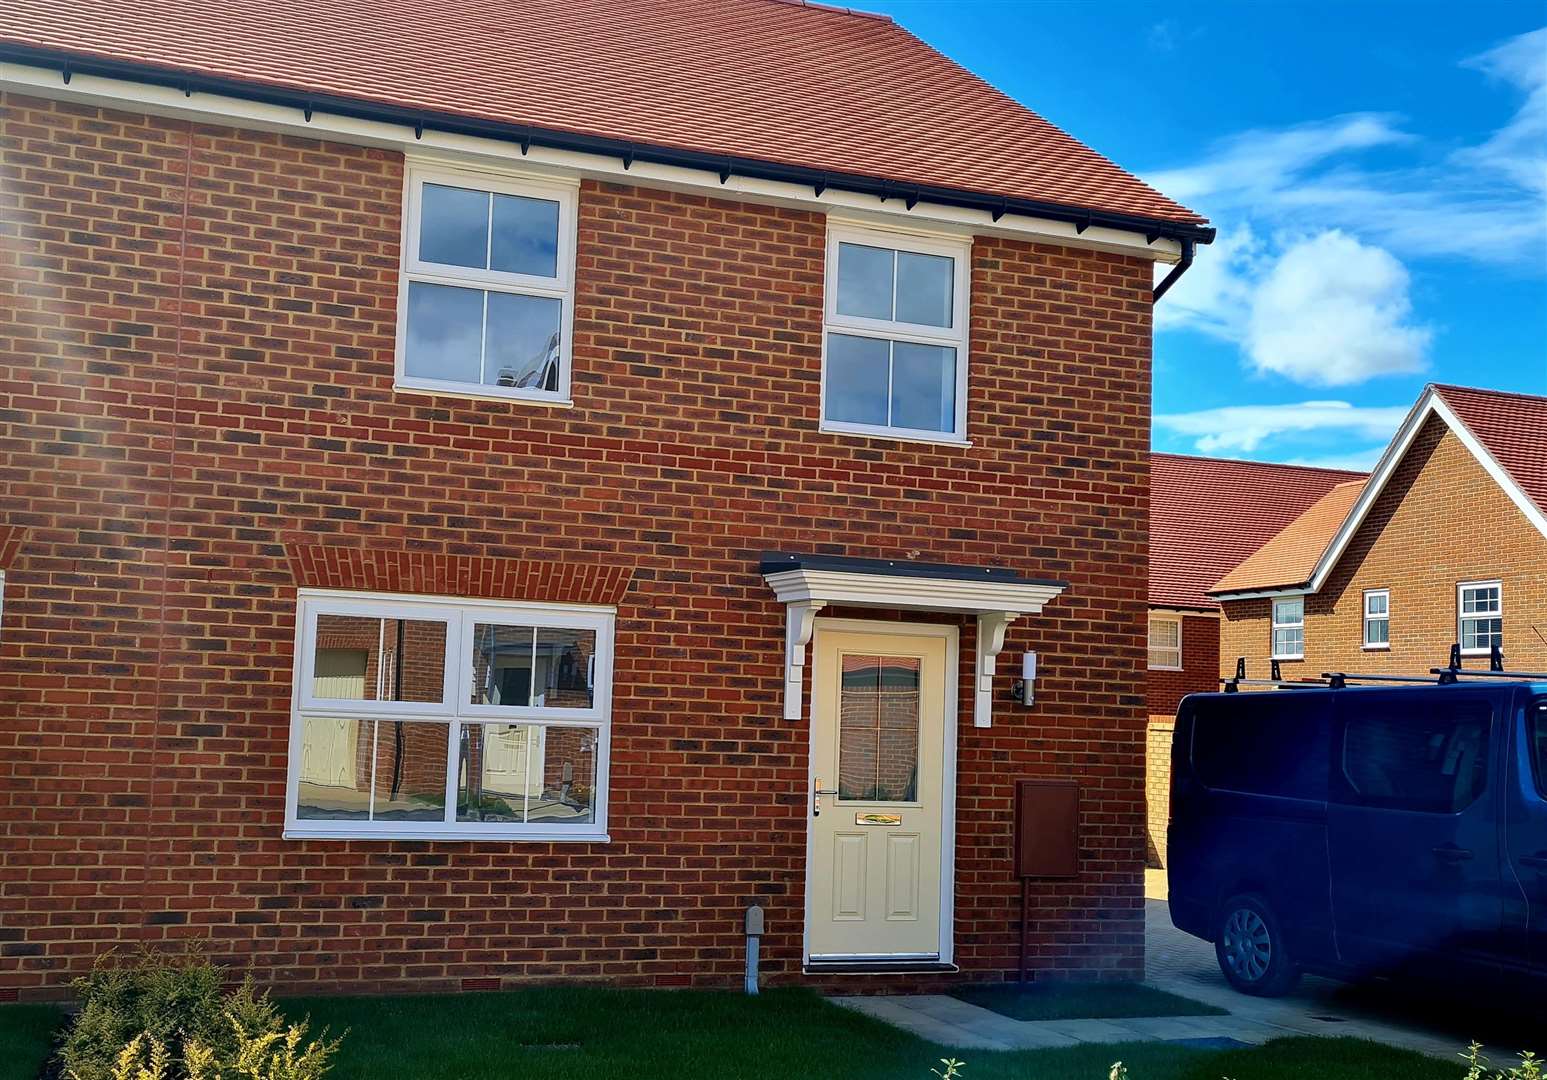 Renting this home in Faversham will set you back £1,800 a month